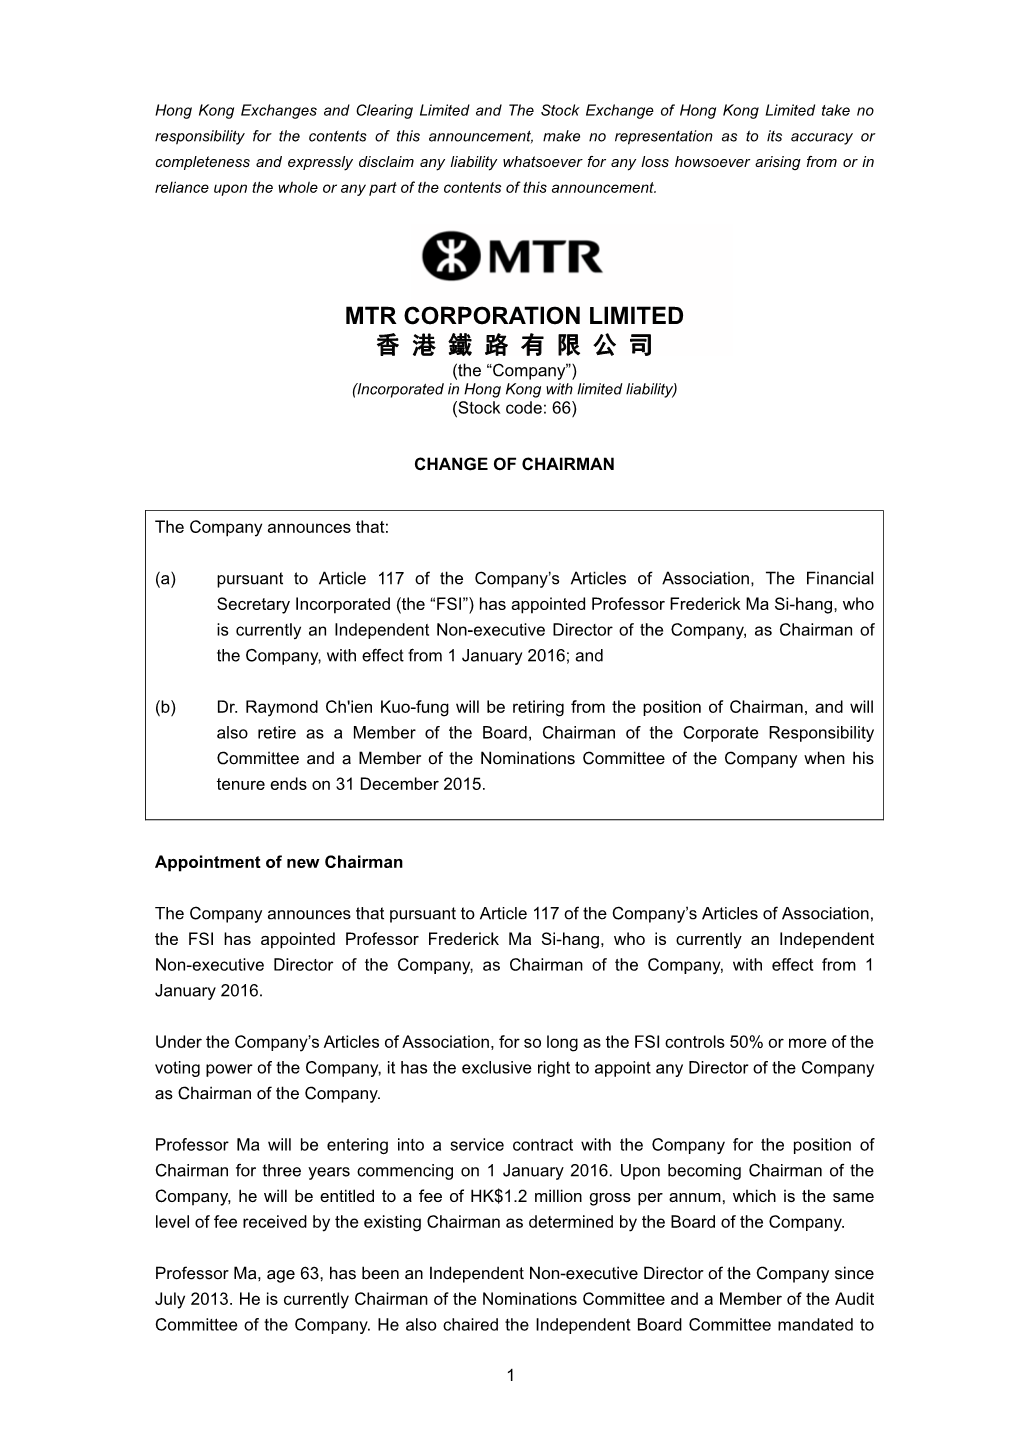 MTR CORPORATION LIMITED 香 港 鐵 路 有 限 公 司 (The “Company”) (Incorporated in Hong Kong with Limited Liability) (Stock Code: 66)